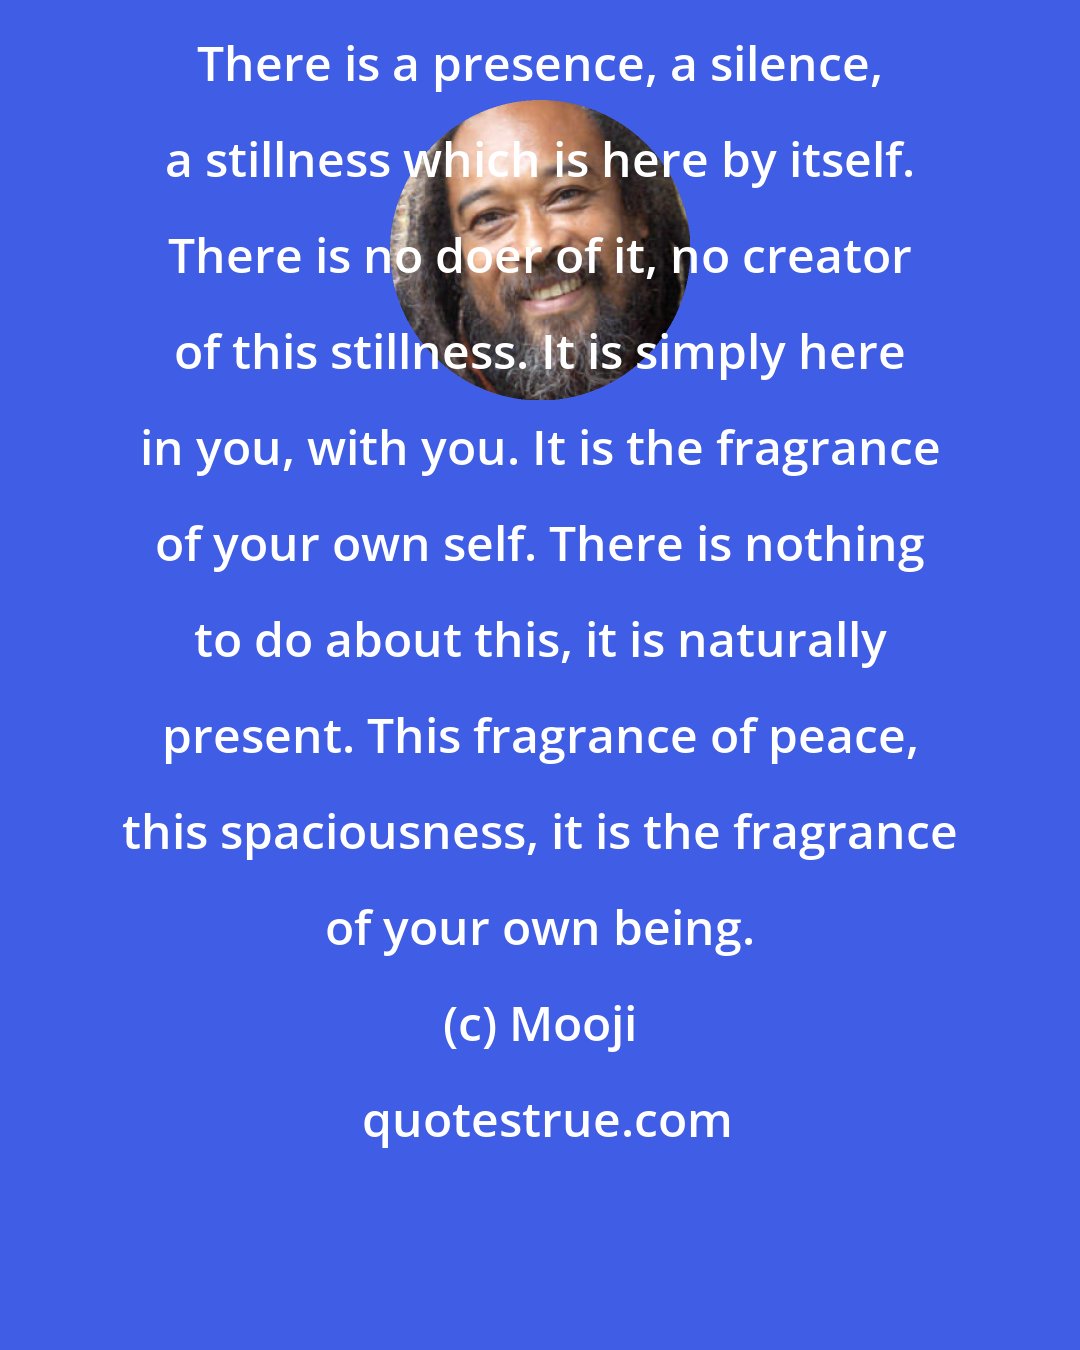 Mooji: There is a presence, a silence, a stillness which is here by itself. There is no doer of it, no creator of this stillness. It is simply here in you, with you. It is the fragrance of your own self. There is nothing to do about this, it is naturally present. This fragrance of peace, this spaciousness, it is the fragrance of your own being.